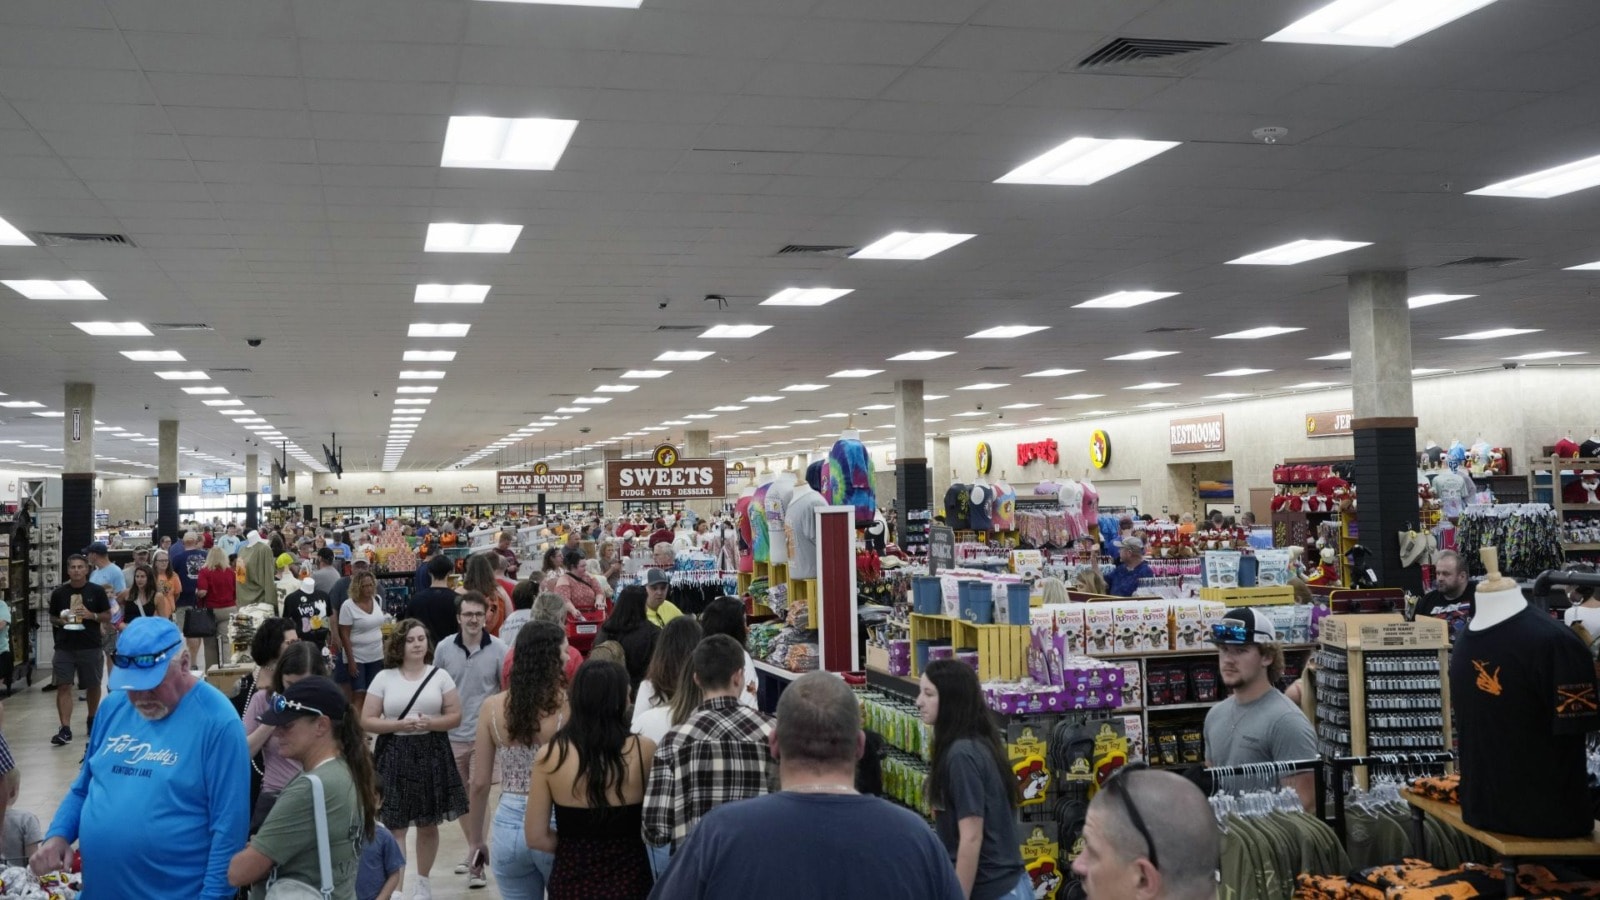 Customers shop inside a Buc-ee's convenience store.